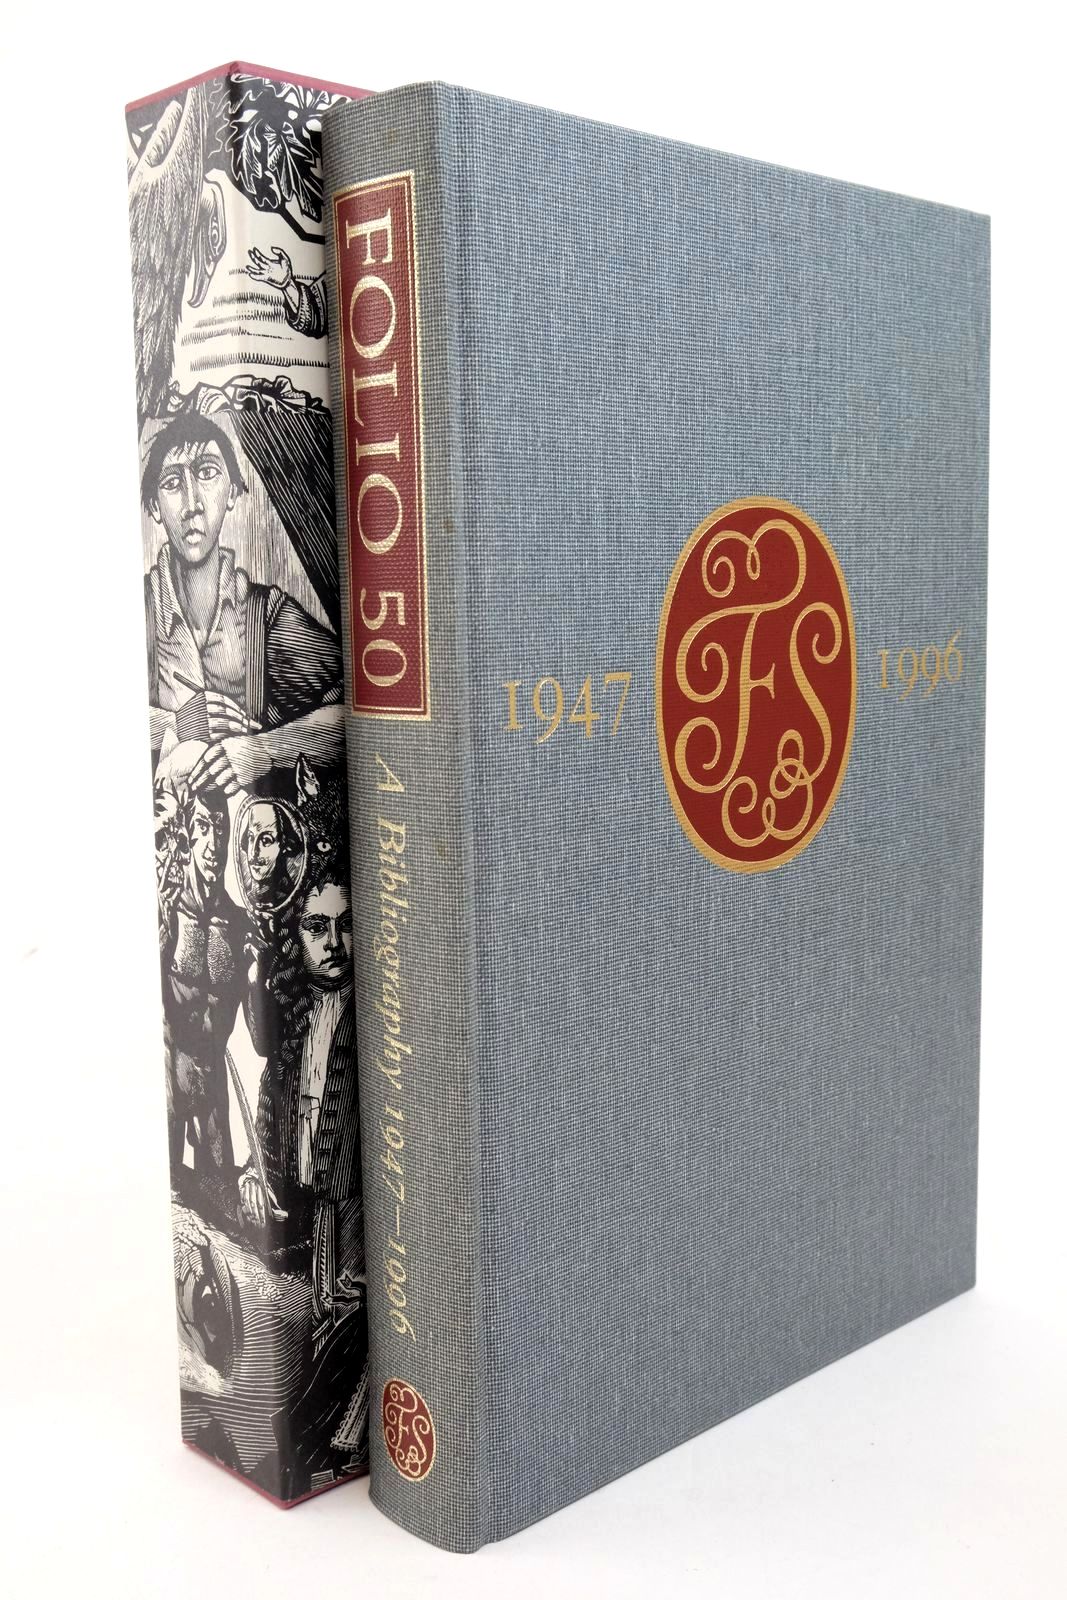 Photo of FOLIO 50 written by Nash, Paul W. published by Folio Press (STOCK CODE: 1322896)  for sale by Stella & Rose's Books